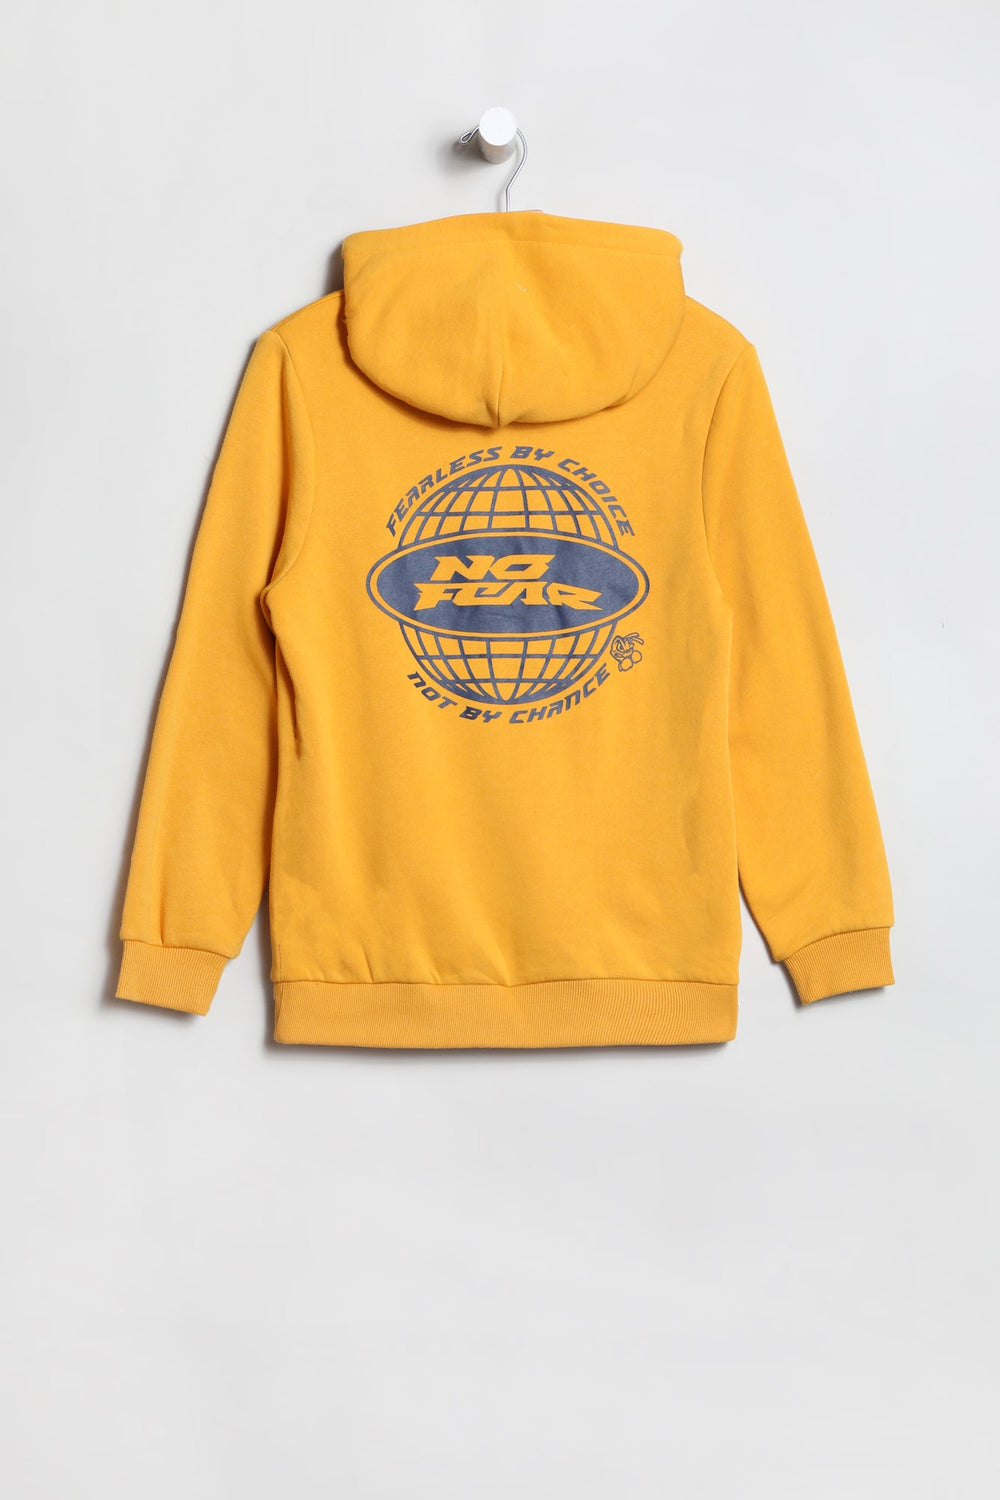 No Fear Youth Fearless By Choice Hoodie Gold